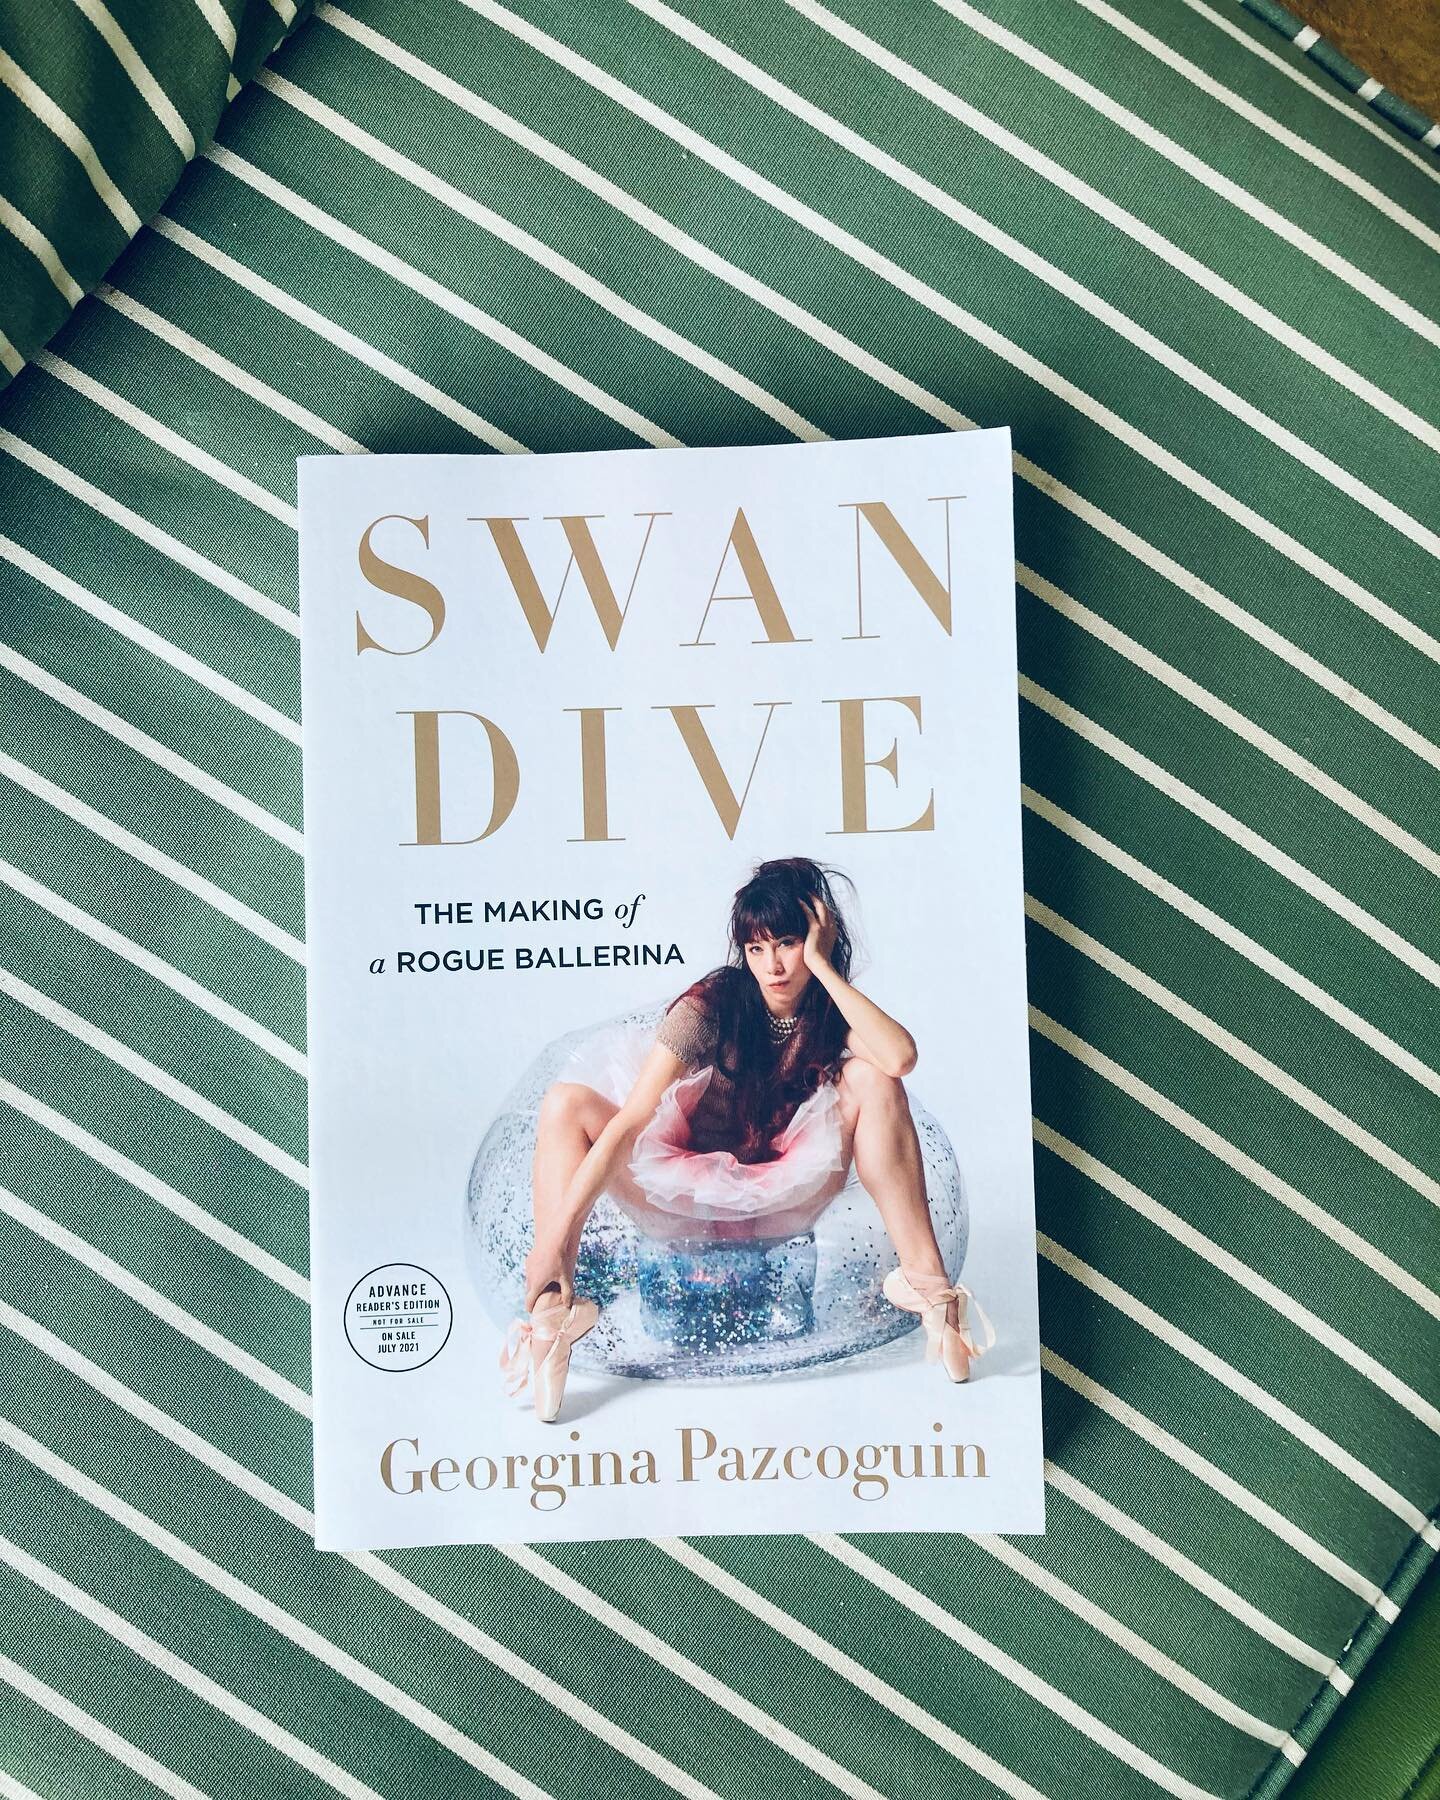 🎉A rave review from @nytbooks of @georgina_pazcoguin&rsquo;s SWAN DIVE, calling it &ldquo;a page-turner of a memoir.&rdquo; Just one week until the book hits shelves! Link in bio for the full review 🦢🩰